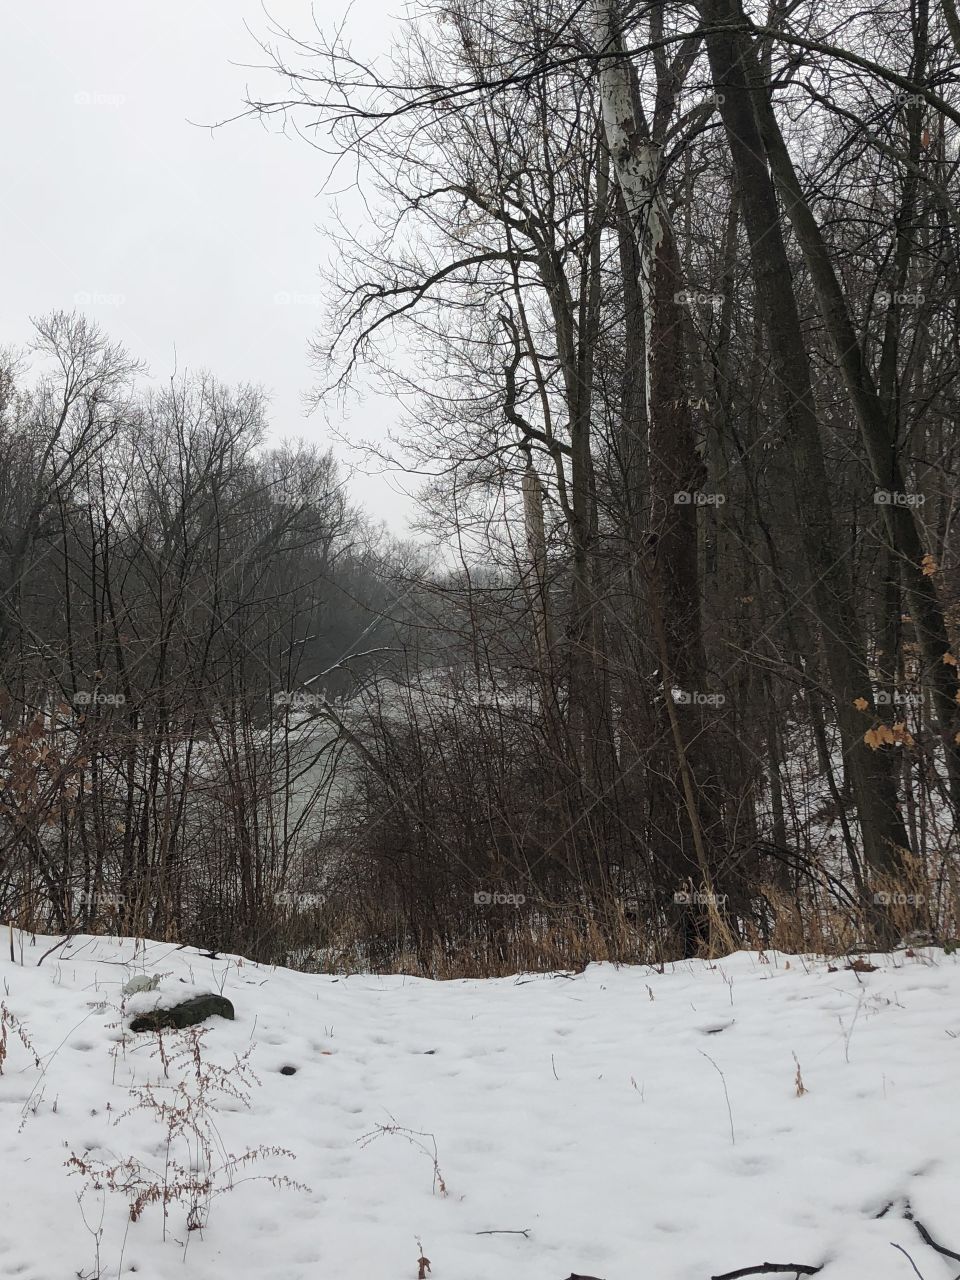 River in the winter